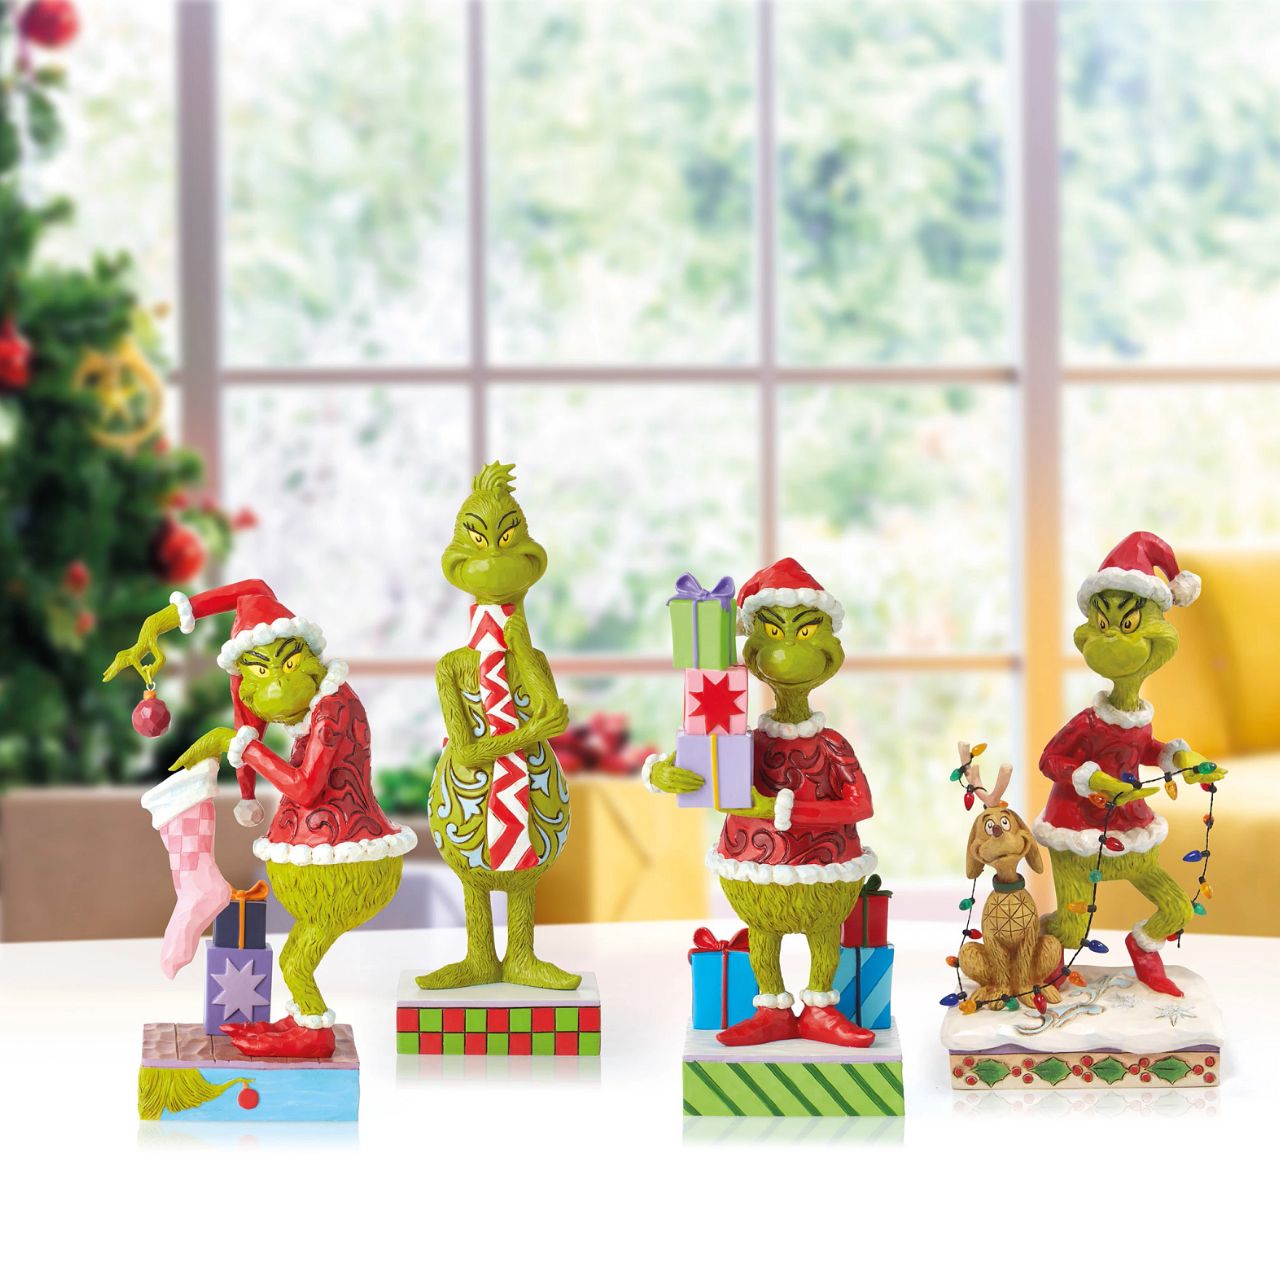 Grinch Holding Presents Figurine  Is the Grinch stealing presents again or has his heart changed to a kinder shape? You decide The Grinch's intentions when placing this colourful Jim Shore design in your home. Whatever his motive, The Grinch is giddy to be apart of your holiday.